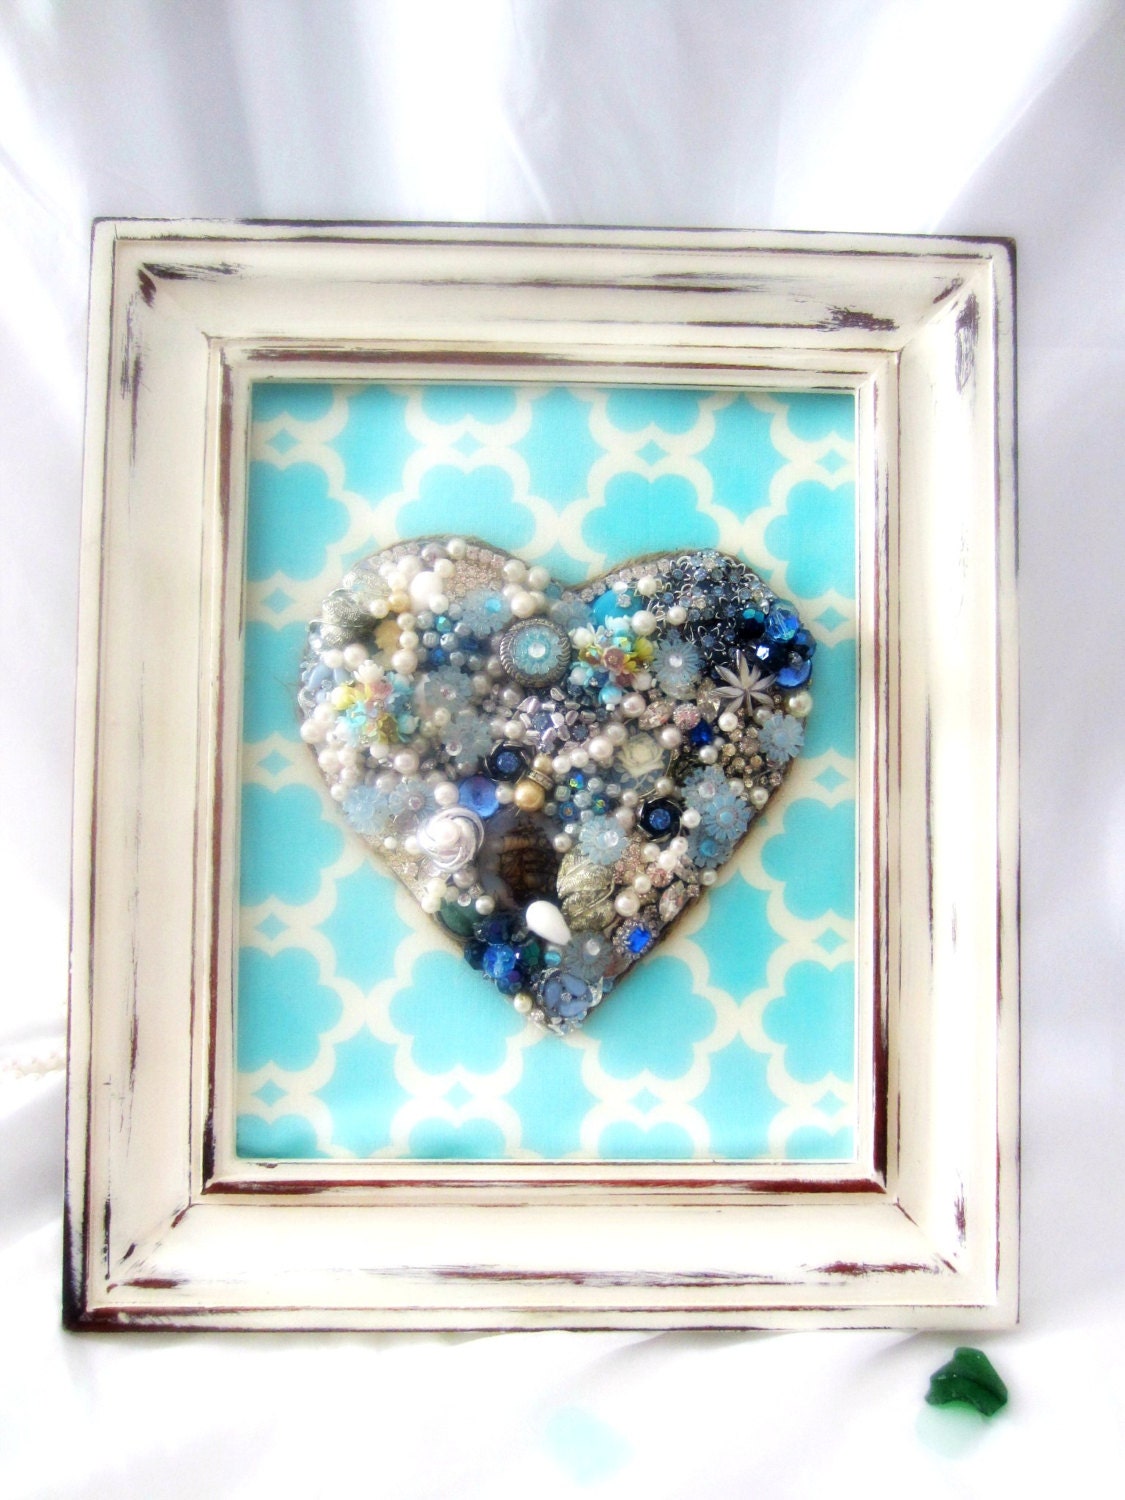 Vintage Jewelry Mosaic Wall Decor Blue Heart - northandsouthshabby